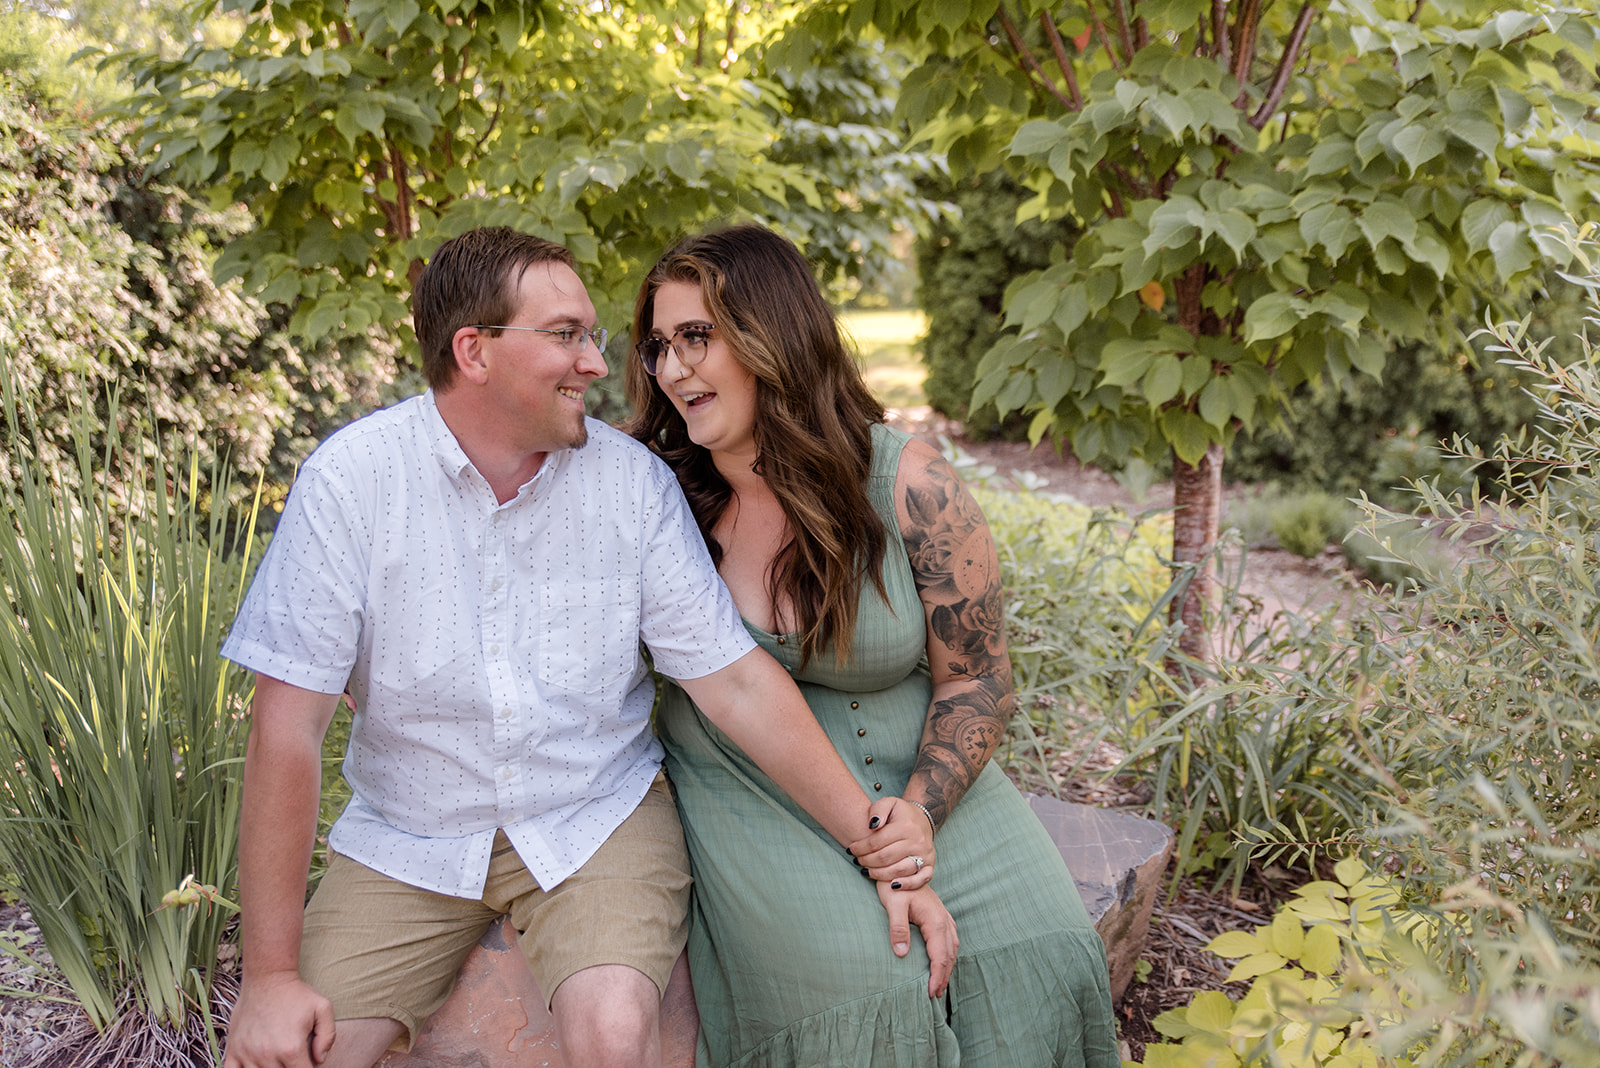 Spring Edina MN engagement session in a garden